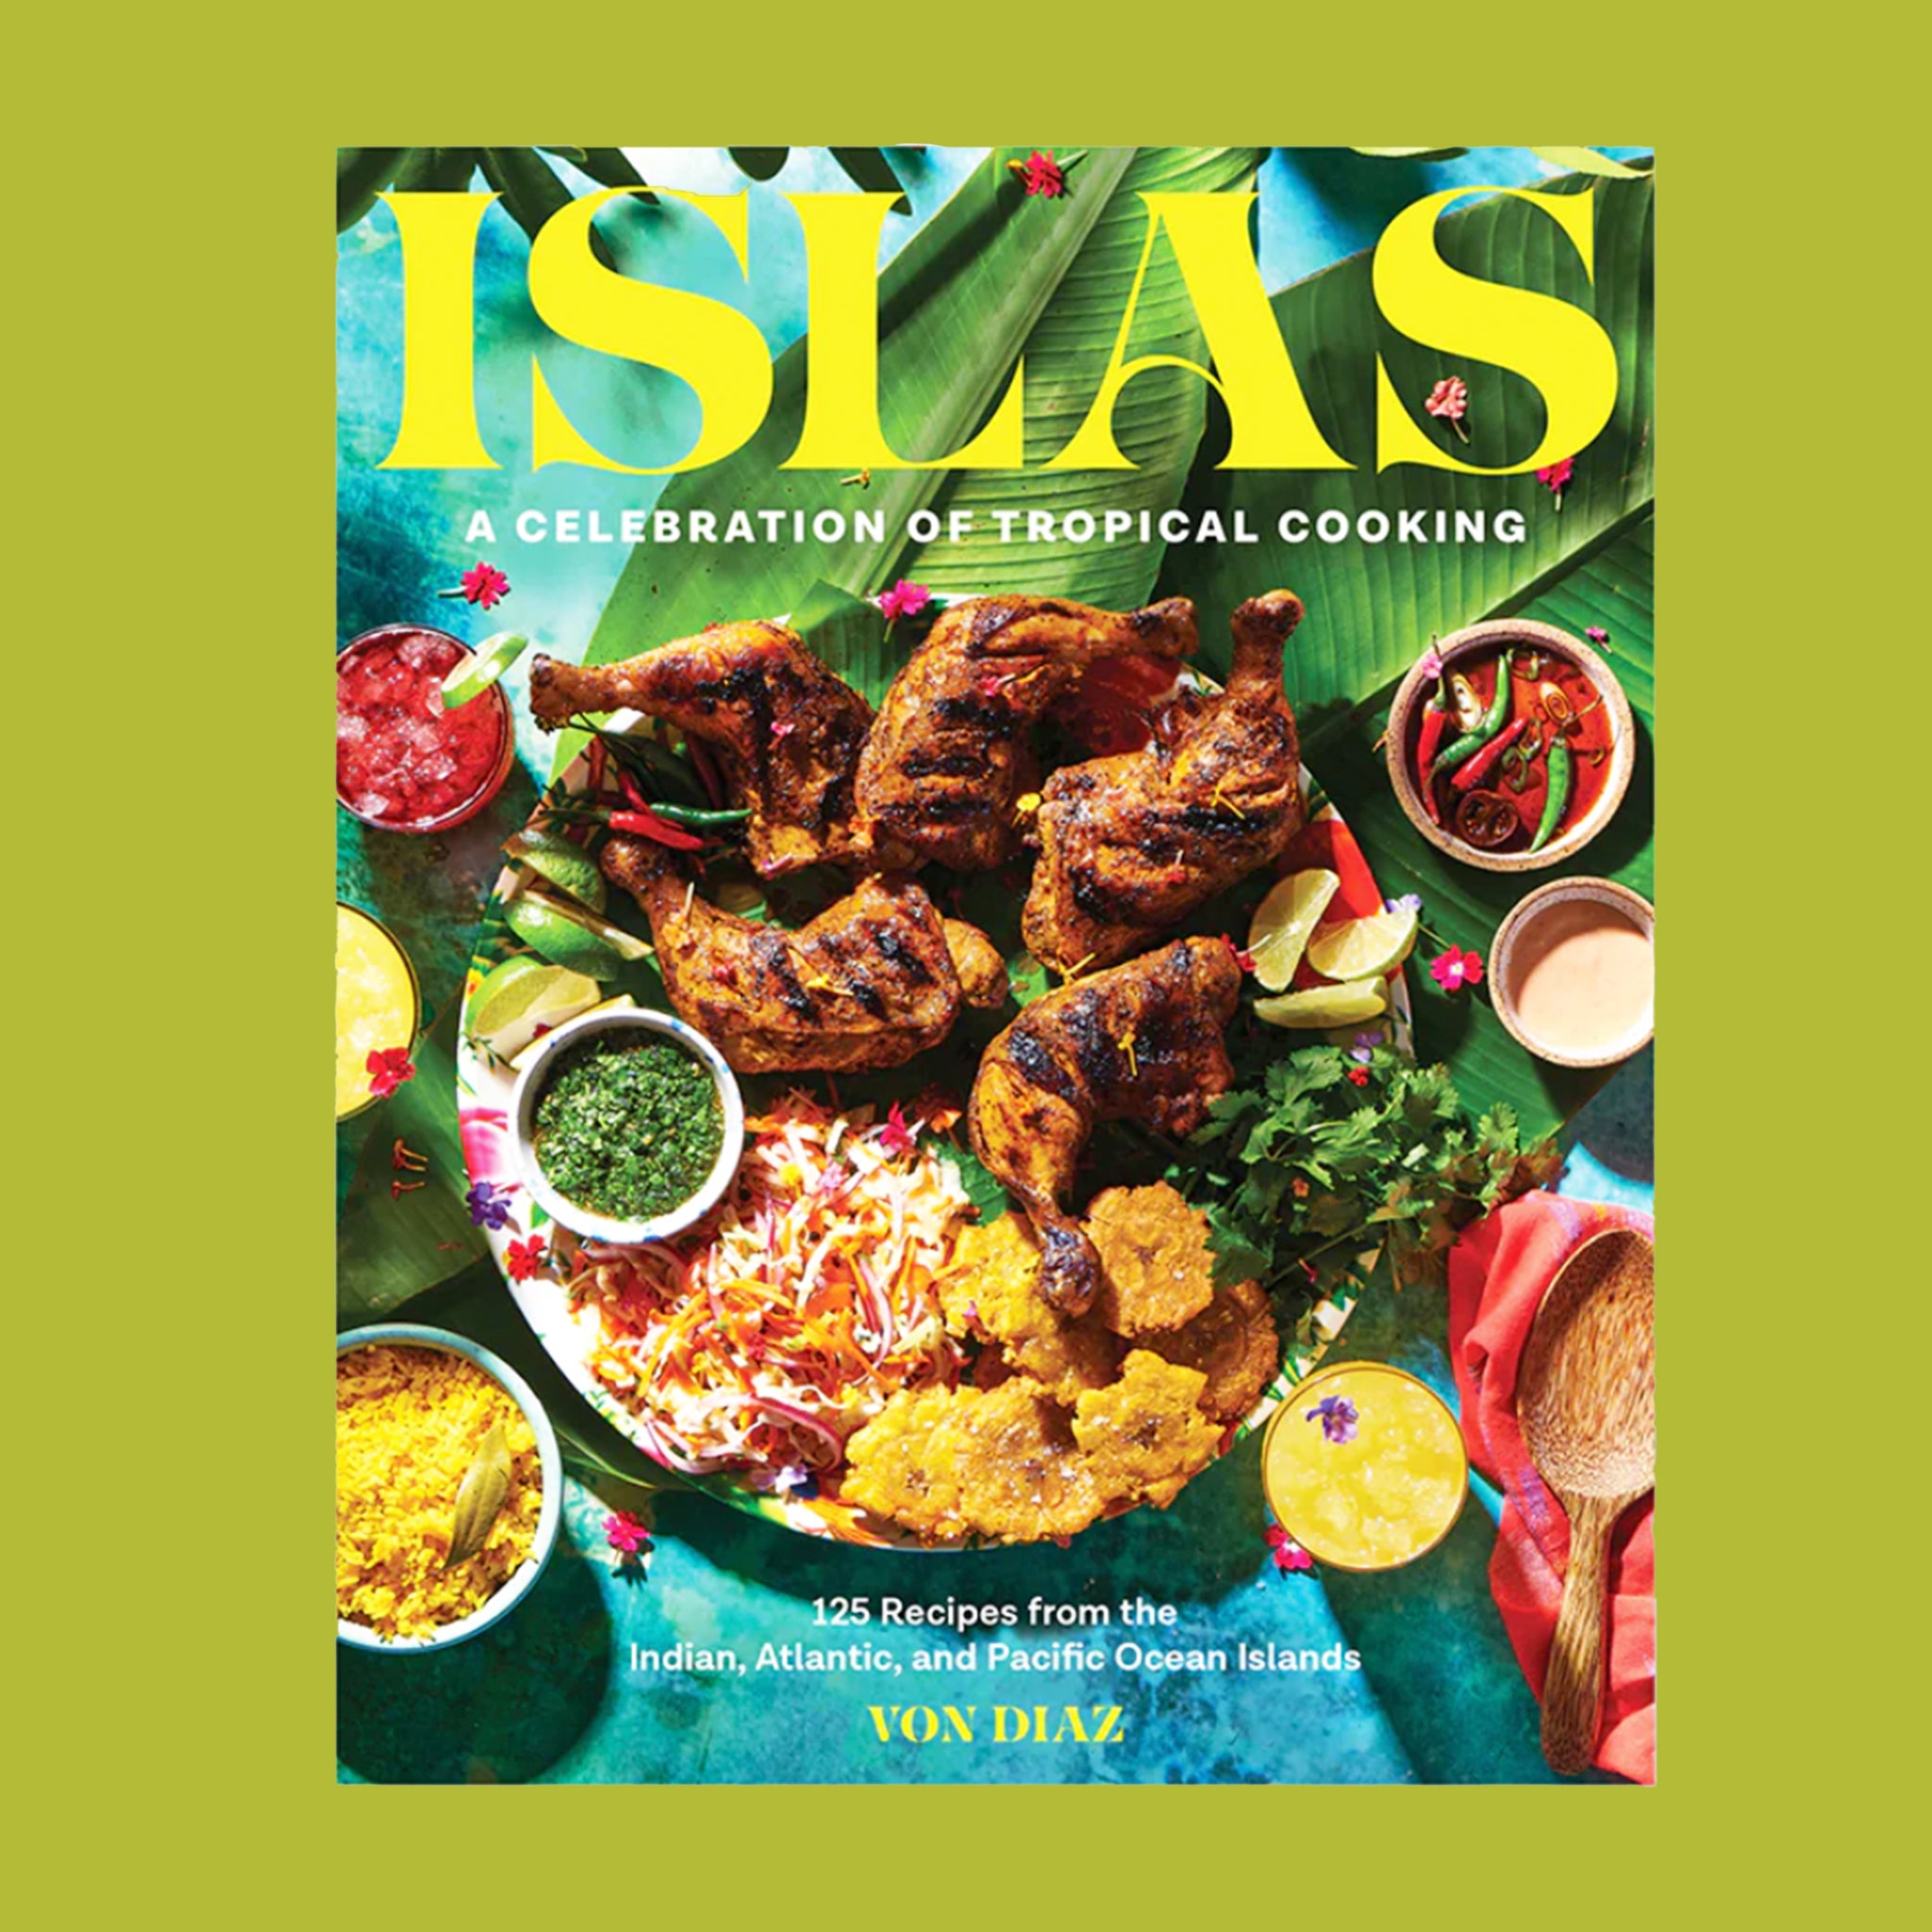 On a bright green background is a colorful book cover with a plate full of grilled food and the title above that reads, &quot;Islas A Celebration of Tropical Cooking&quot;.